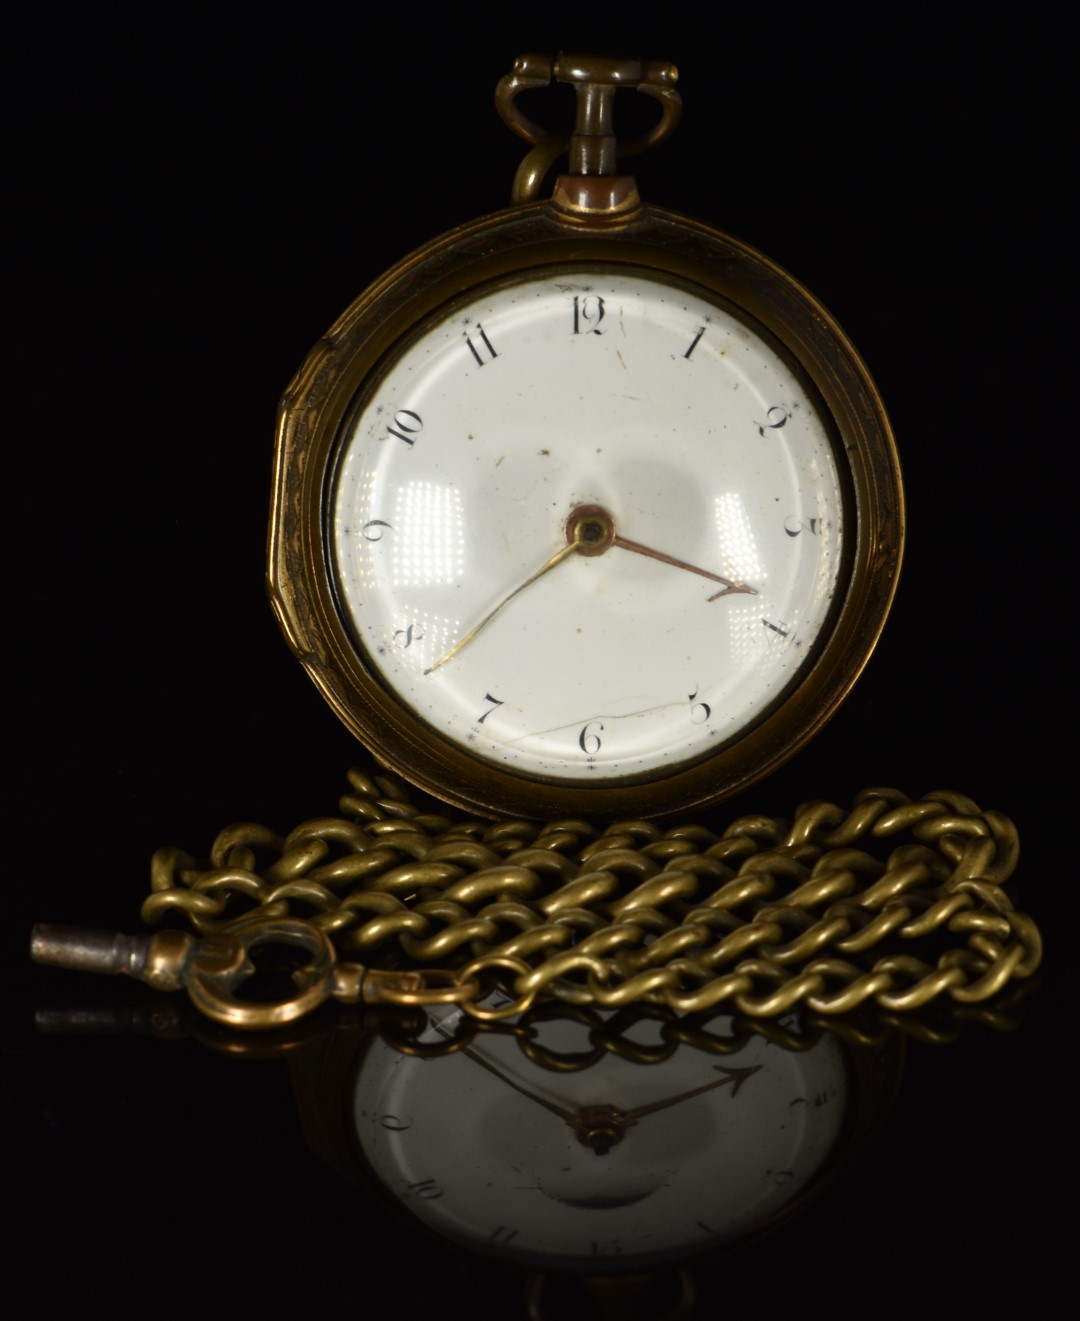 William Sheafe of London pair cased pocket watch with gold hands, black Arabic numerals, white